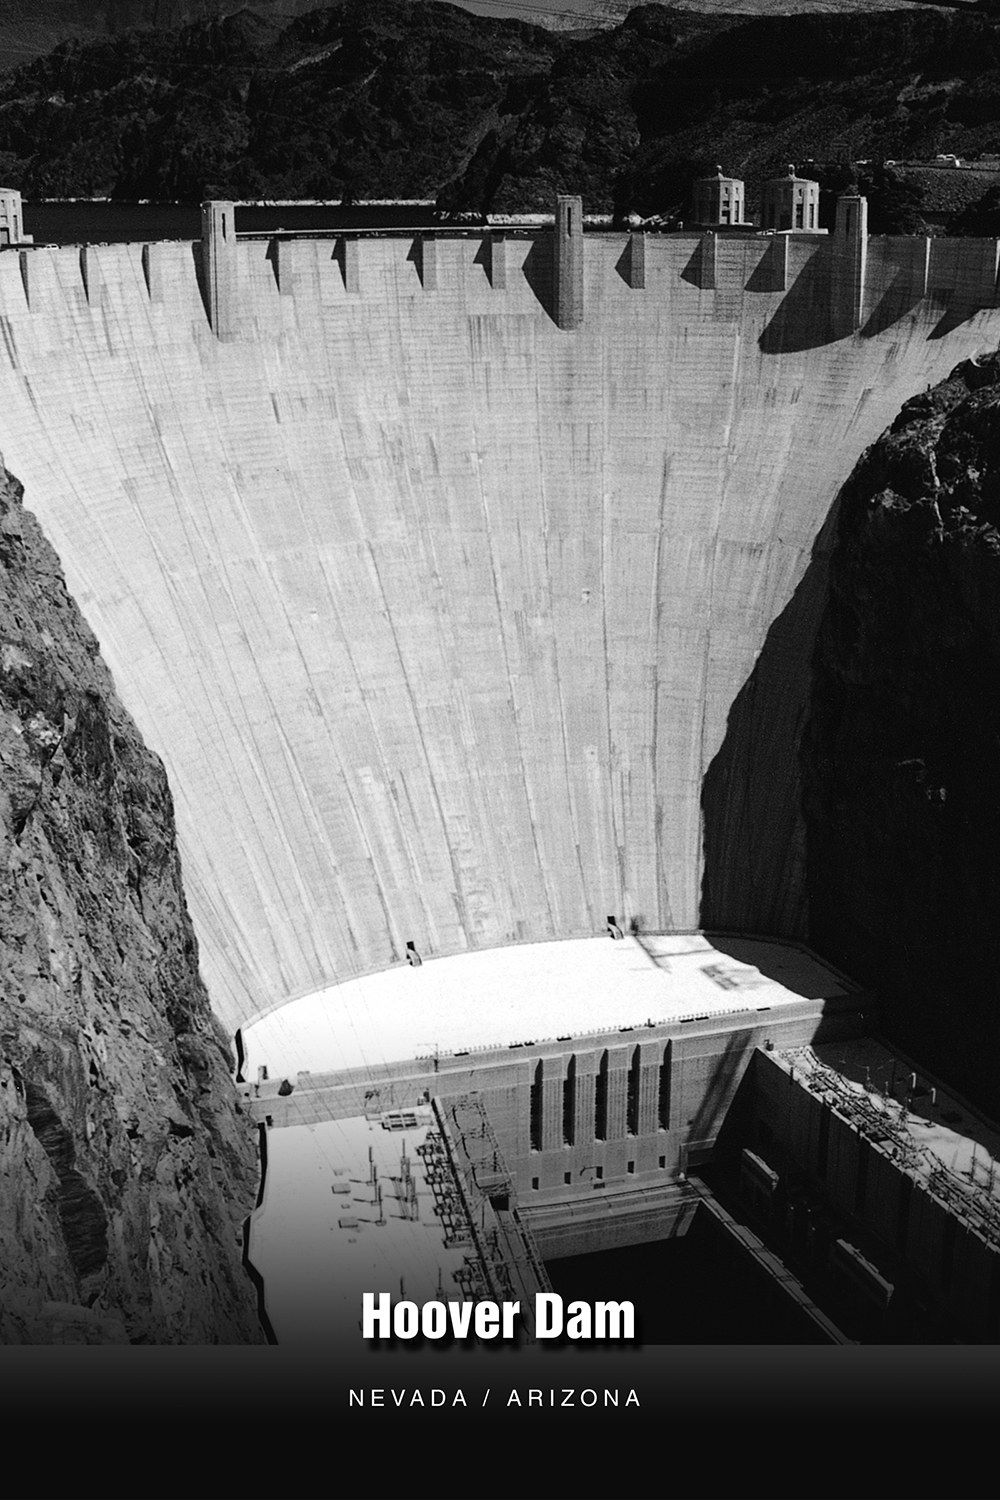 Water for Las Vegas The Hoover Dam Connection